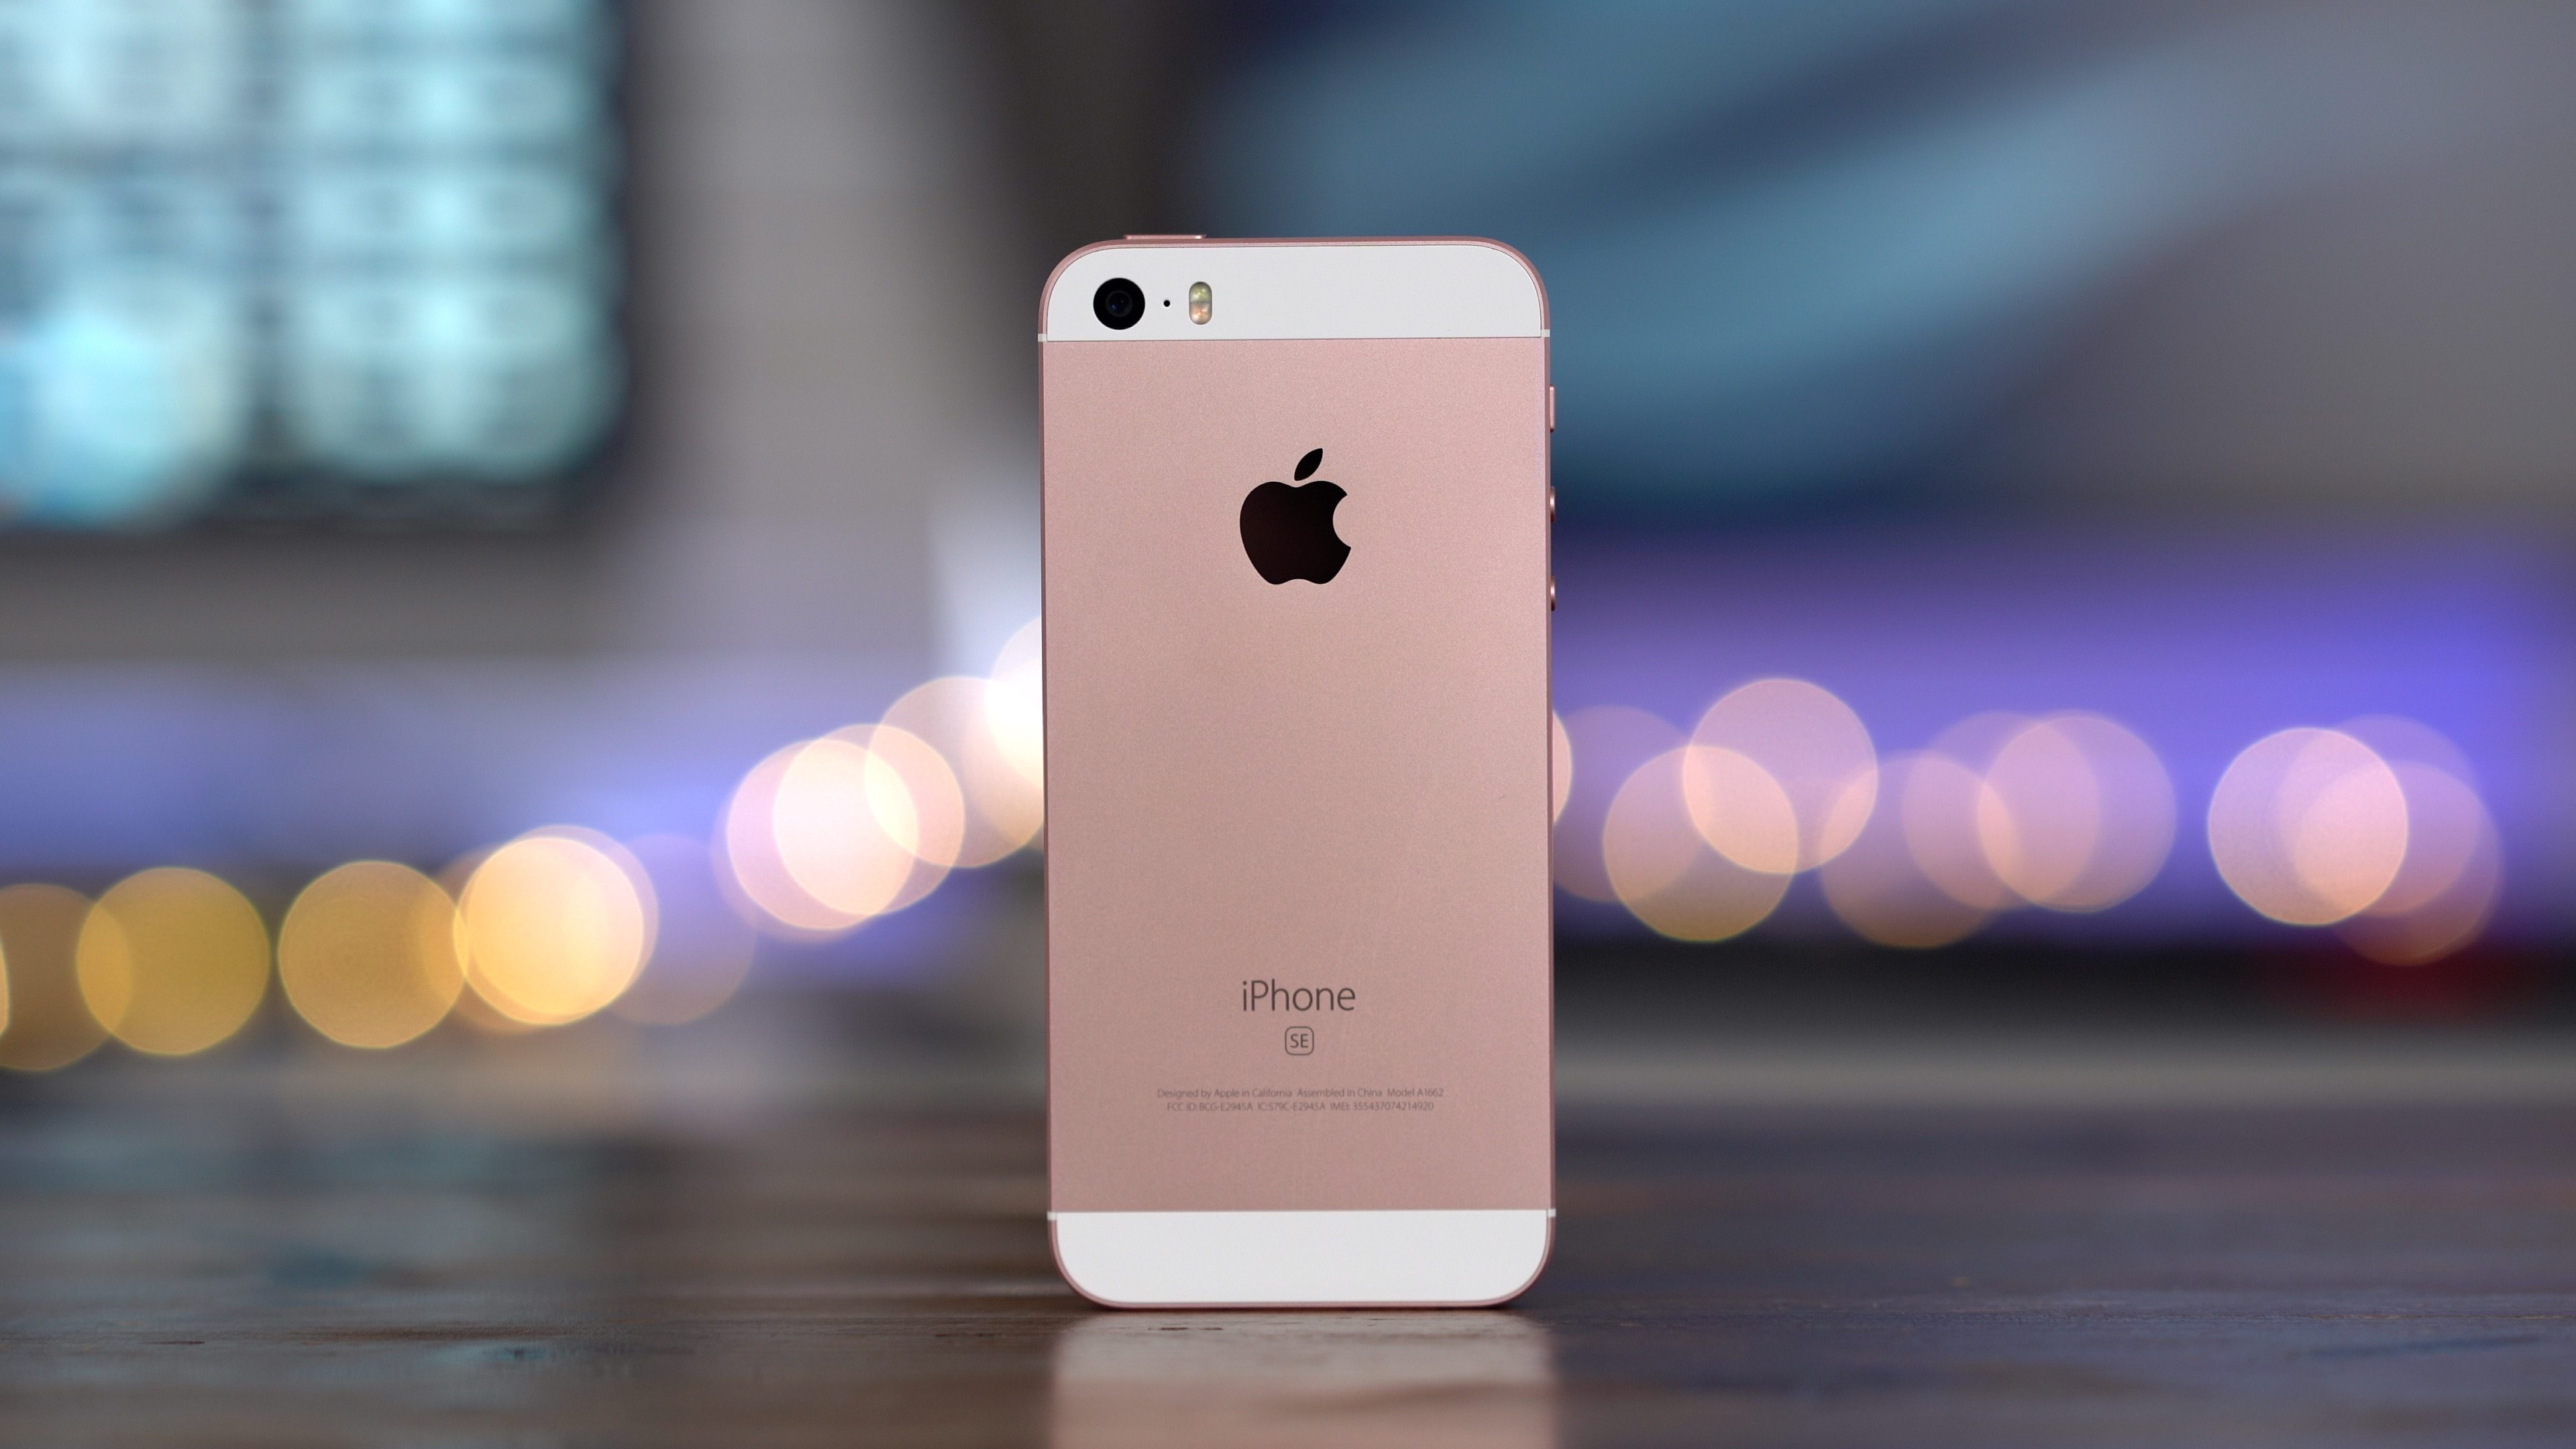 Apple's 32GB iPhone SE is the perfect backup phone at 70 (Refurb, Orig